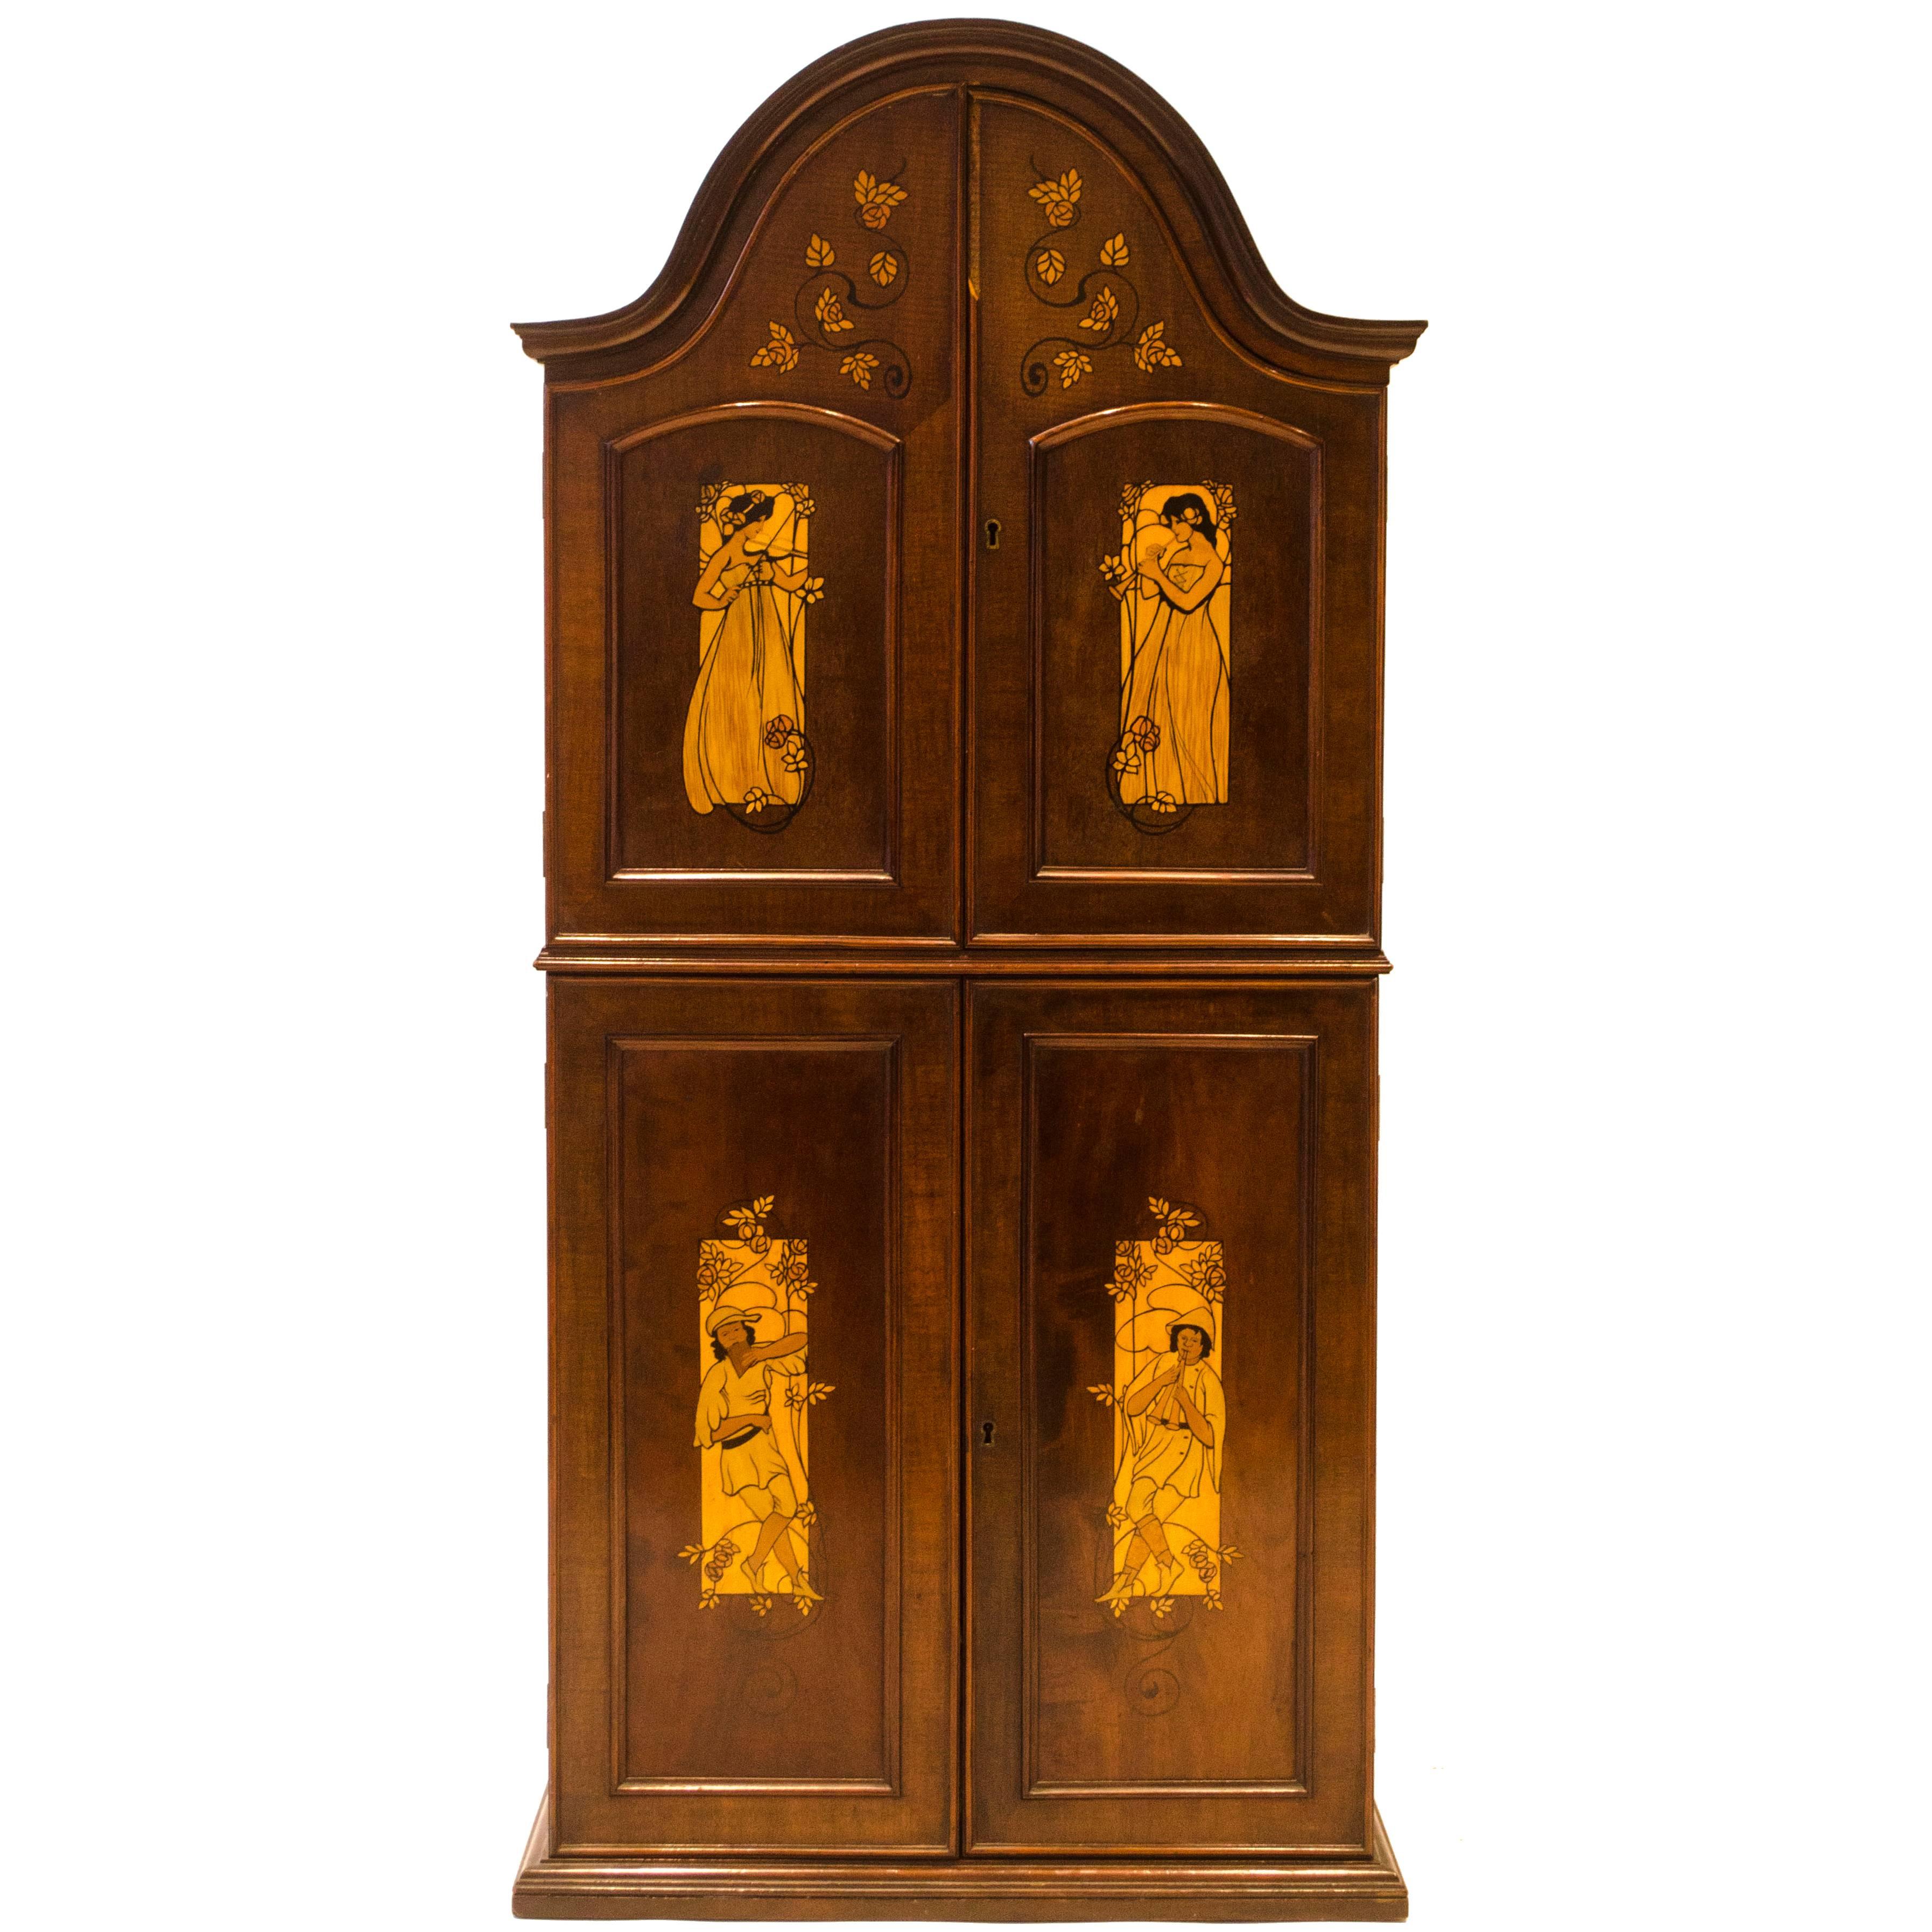 W J Neatby Attri, English Art Nouveau Music Cabinet with Musicians to the Doors For Sale